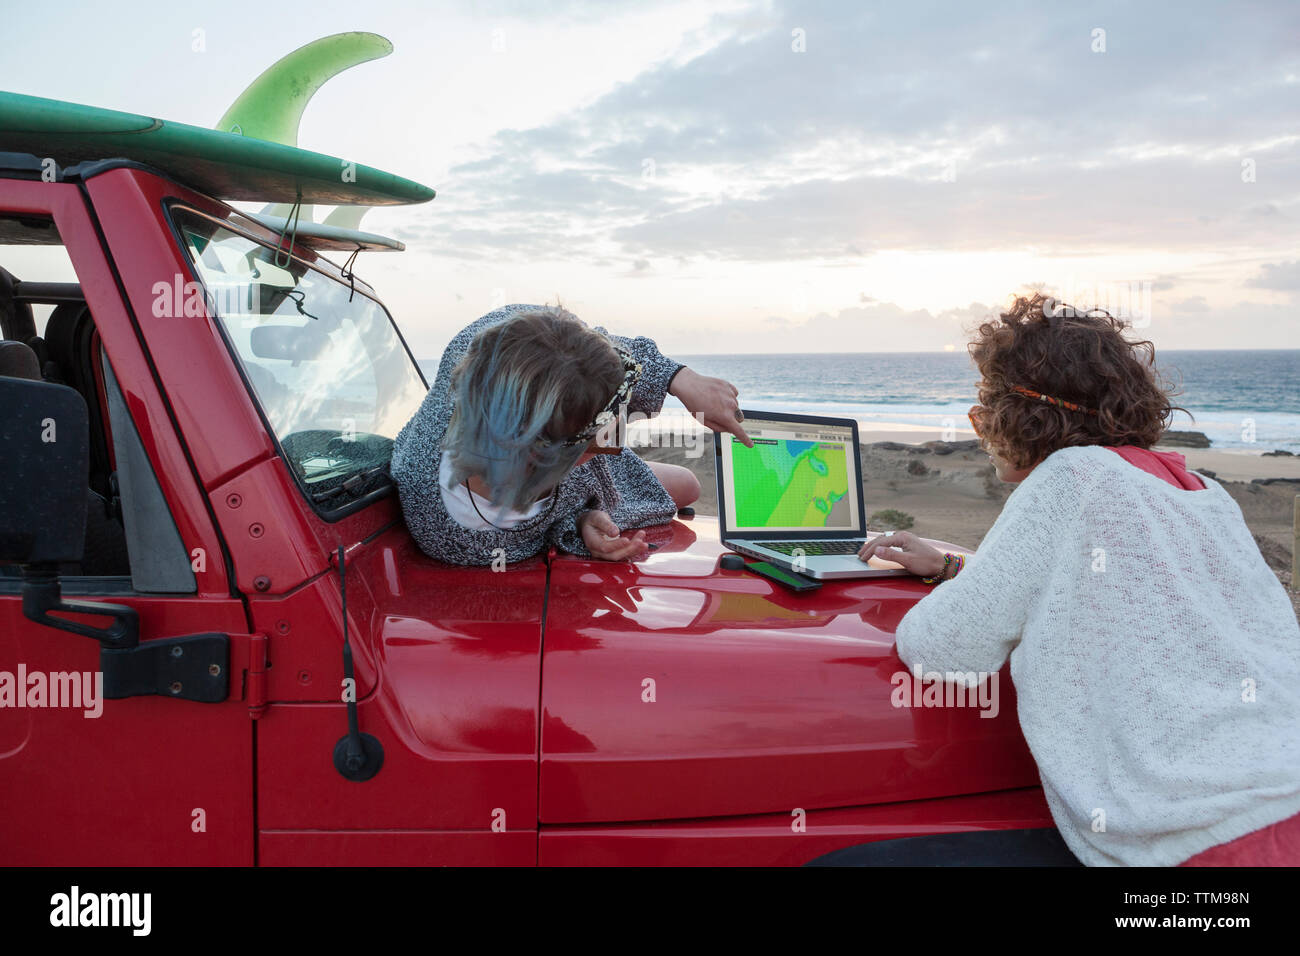 Two surfer girls  on their 4x4 car checking surf forecast on a laptop Stock Photo